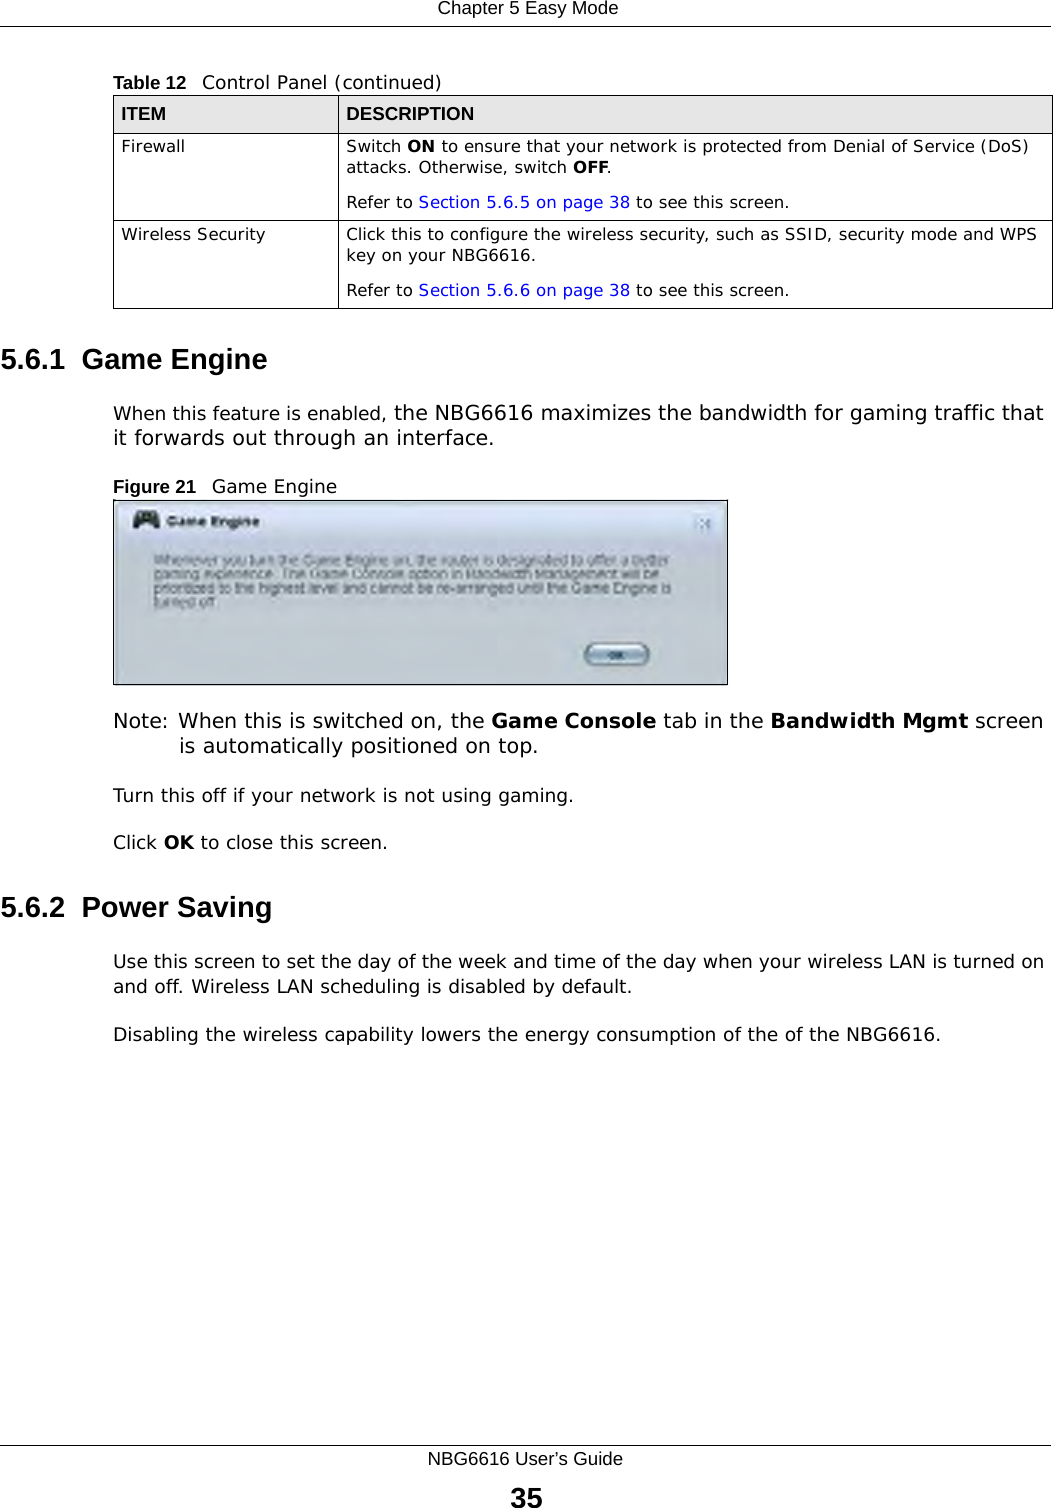  Chapter 5 Easy ModeNBG6616 User’s Guide355.6.1  Game EngineWhen this feature is enabled, the NBG6616 maximizes the bandwidth for gaming traffic that it forwards out through an interface.Figure 21   Game EngineNote: When this is switched on, the Game Console tab in the Bandwidth Mgmt screen is automatically positioned on top. Turn this off if your network is not using gaming.Click OK to close this screen.5.6.2  Power SavingUse this screen to set the day of the week and time of the day when your wireless LAN is turned on and off. Wireless LAN scheduling is disabled by default. Disabling the wireless capability lowers the energy consumption of the of the NBG6616. Firewall Switch ON to ensure that your network is protected from Denial of Service (DoS) attacks. Otherwise, switch OFF.Refer to Section 5.6.5 on page 38 to see this screen.Wireless Security Click this to configure the wireless security, such as SSID, security mode and WPS key on your NBG6616. Refer to Section 5.6.6 on page 38 to see this screen.Table 12   Control Panel (continued)ITEM DESCRIPTION